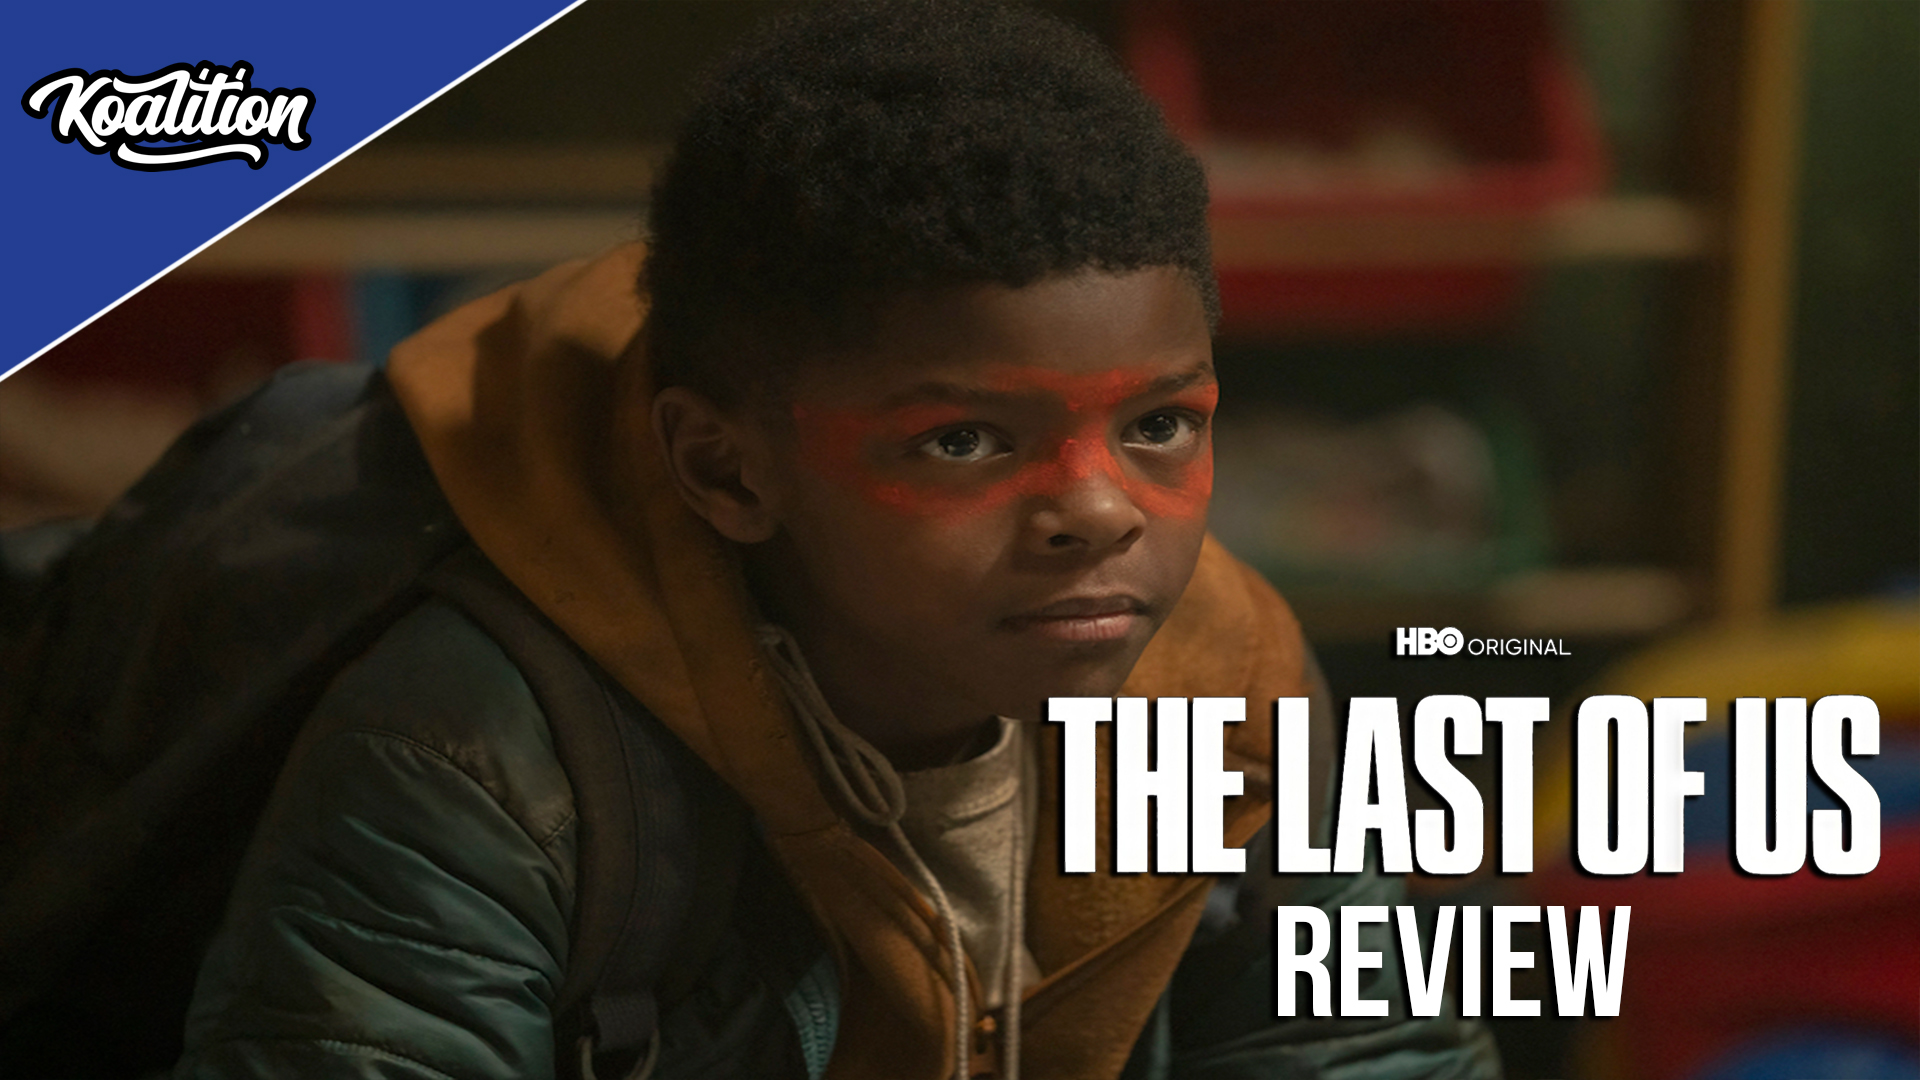 The Last of Us Season 1 Episode 5 “Endure and Survive” Spoiler Review – The Koalition